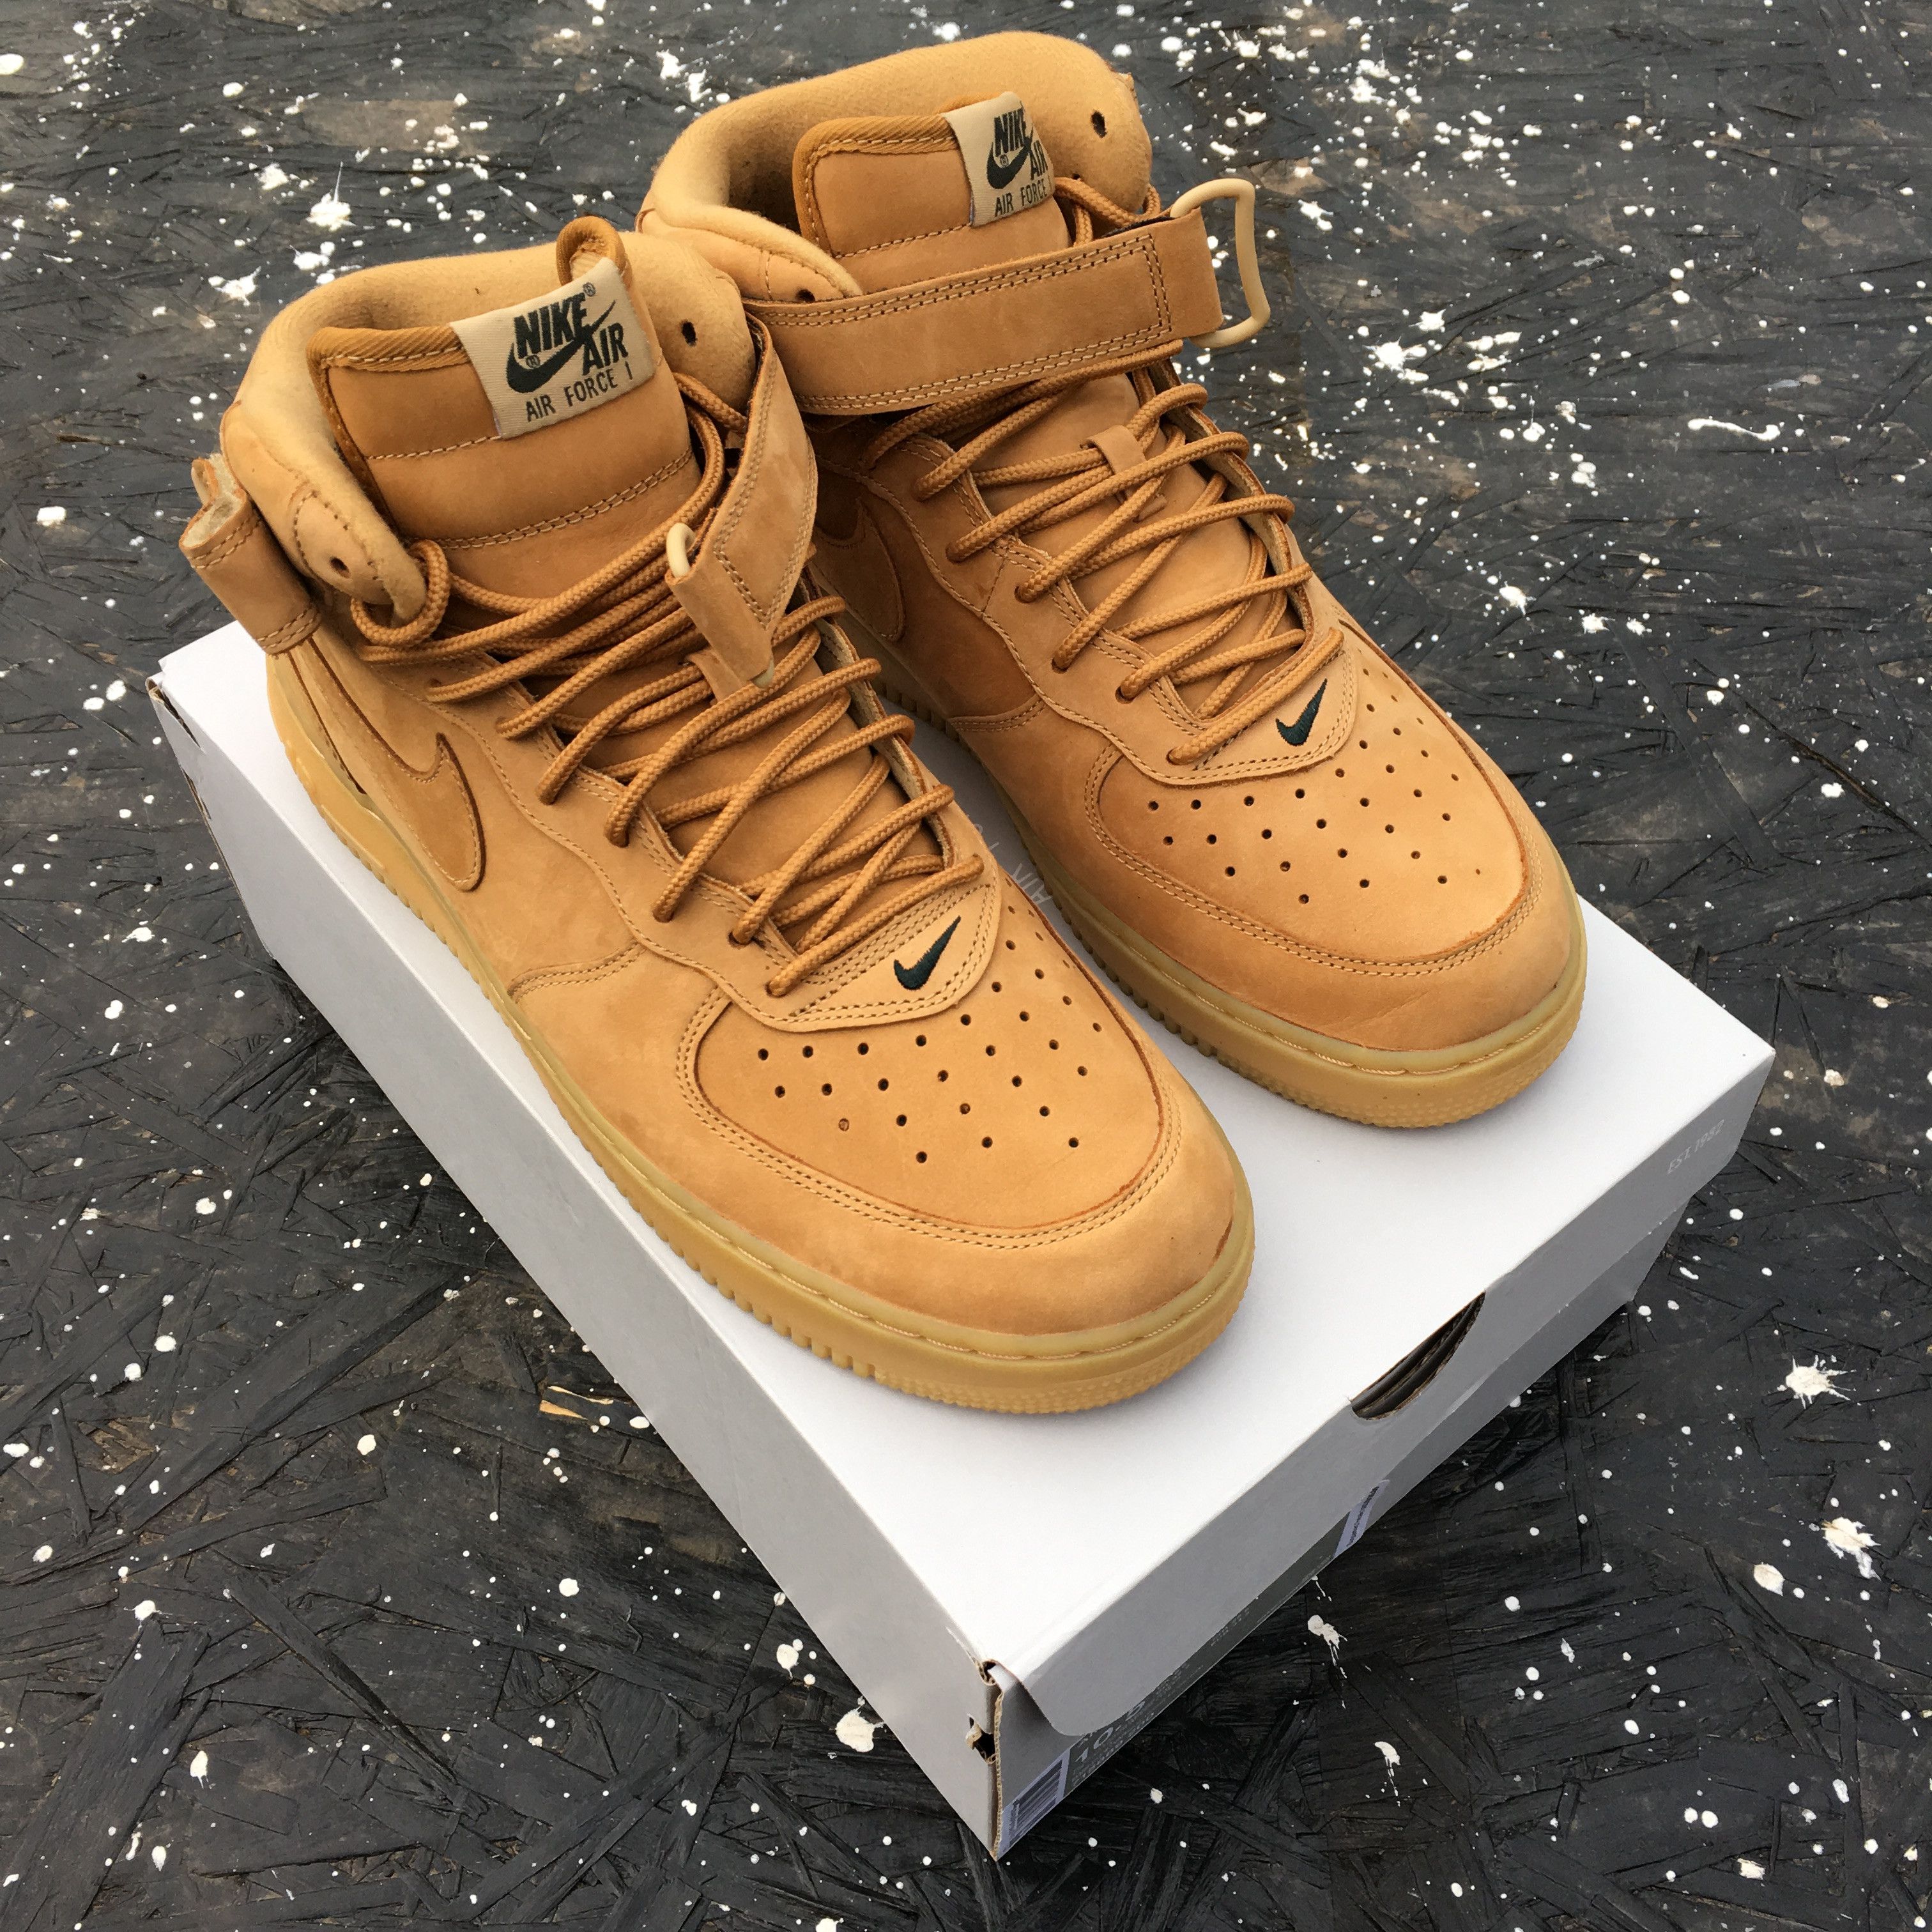 Nike Air Force 1 Mid Flax "Wheat" Size US 10.5 / EU 43-44 - 1 Preview